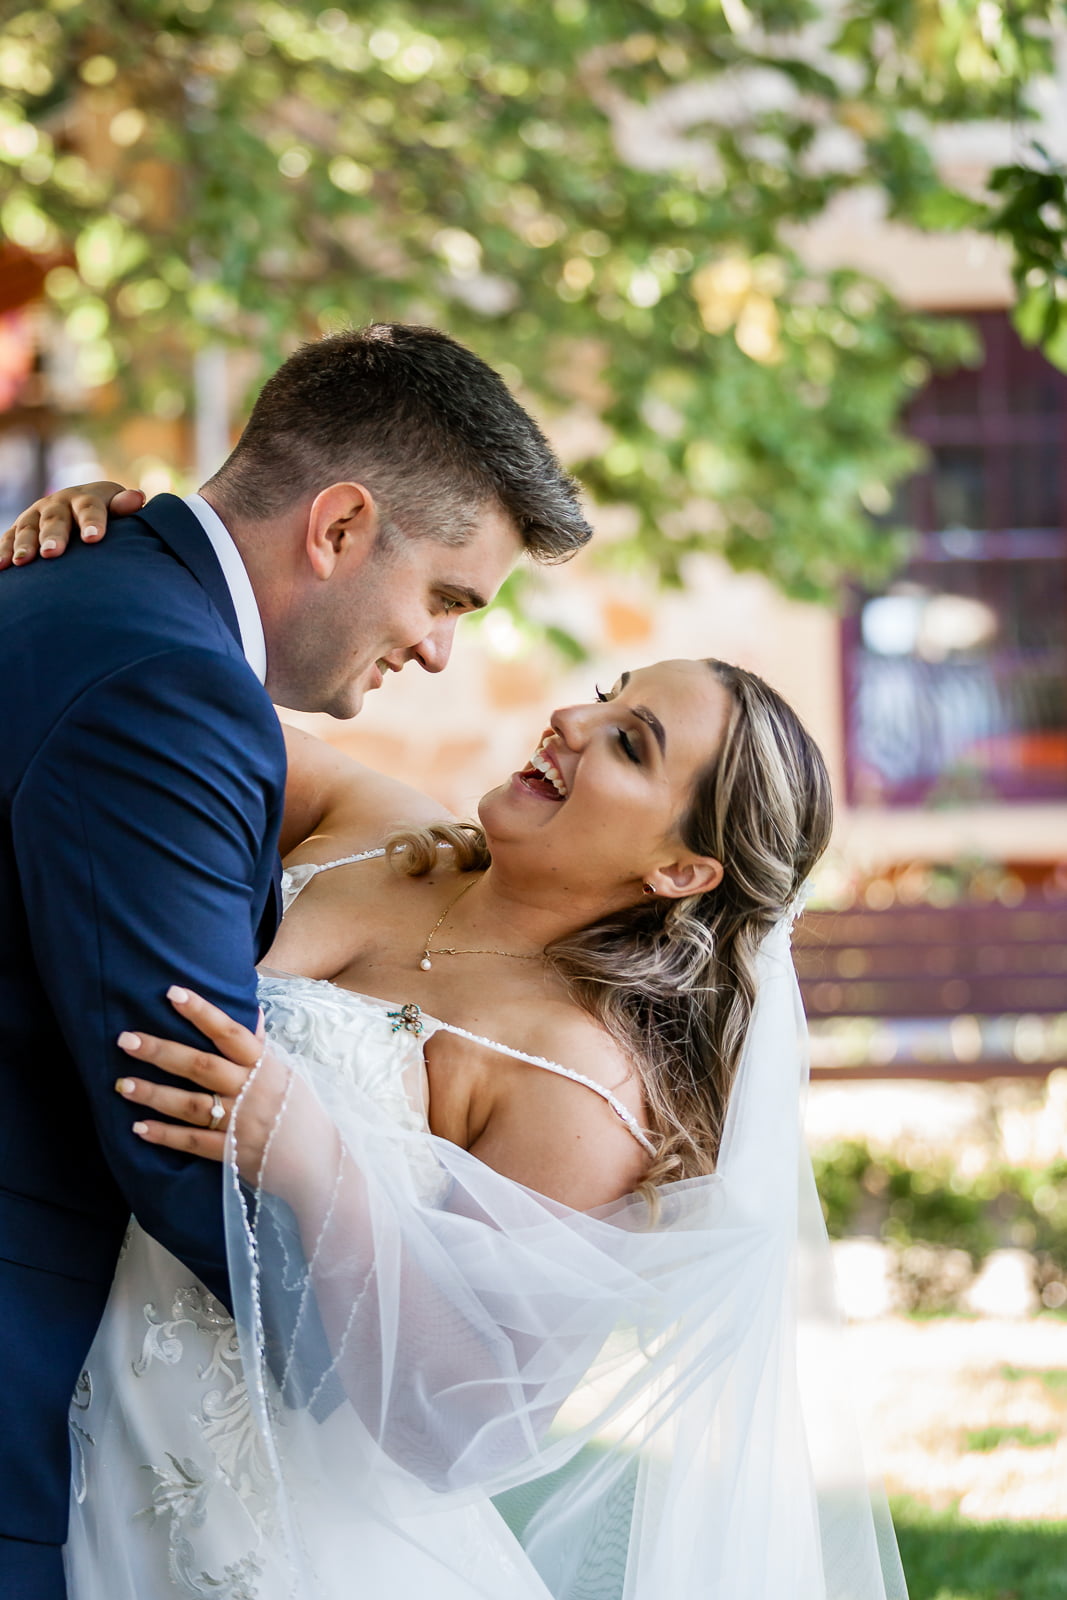 Wedding Photography Adelaide by Crafted Weddings